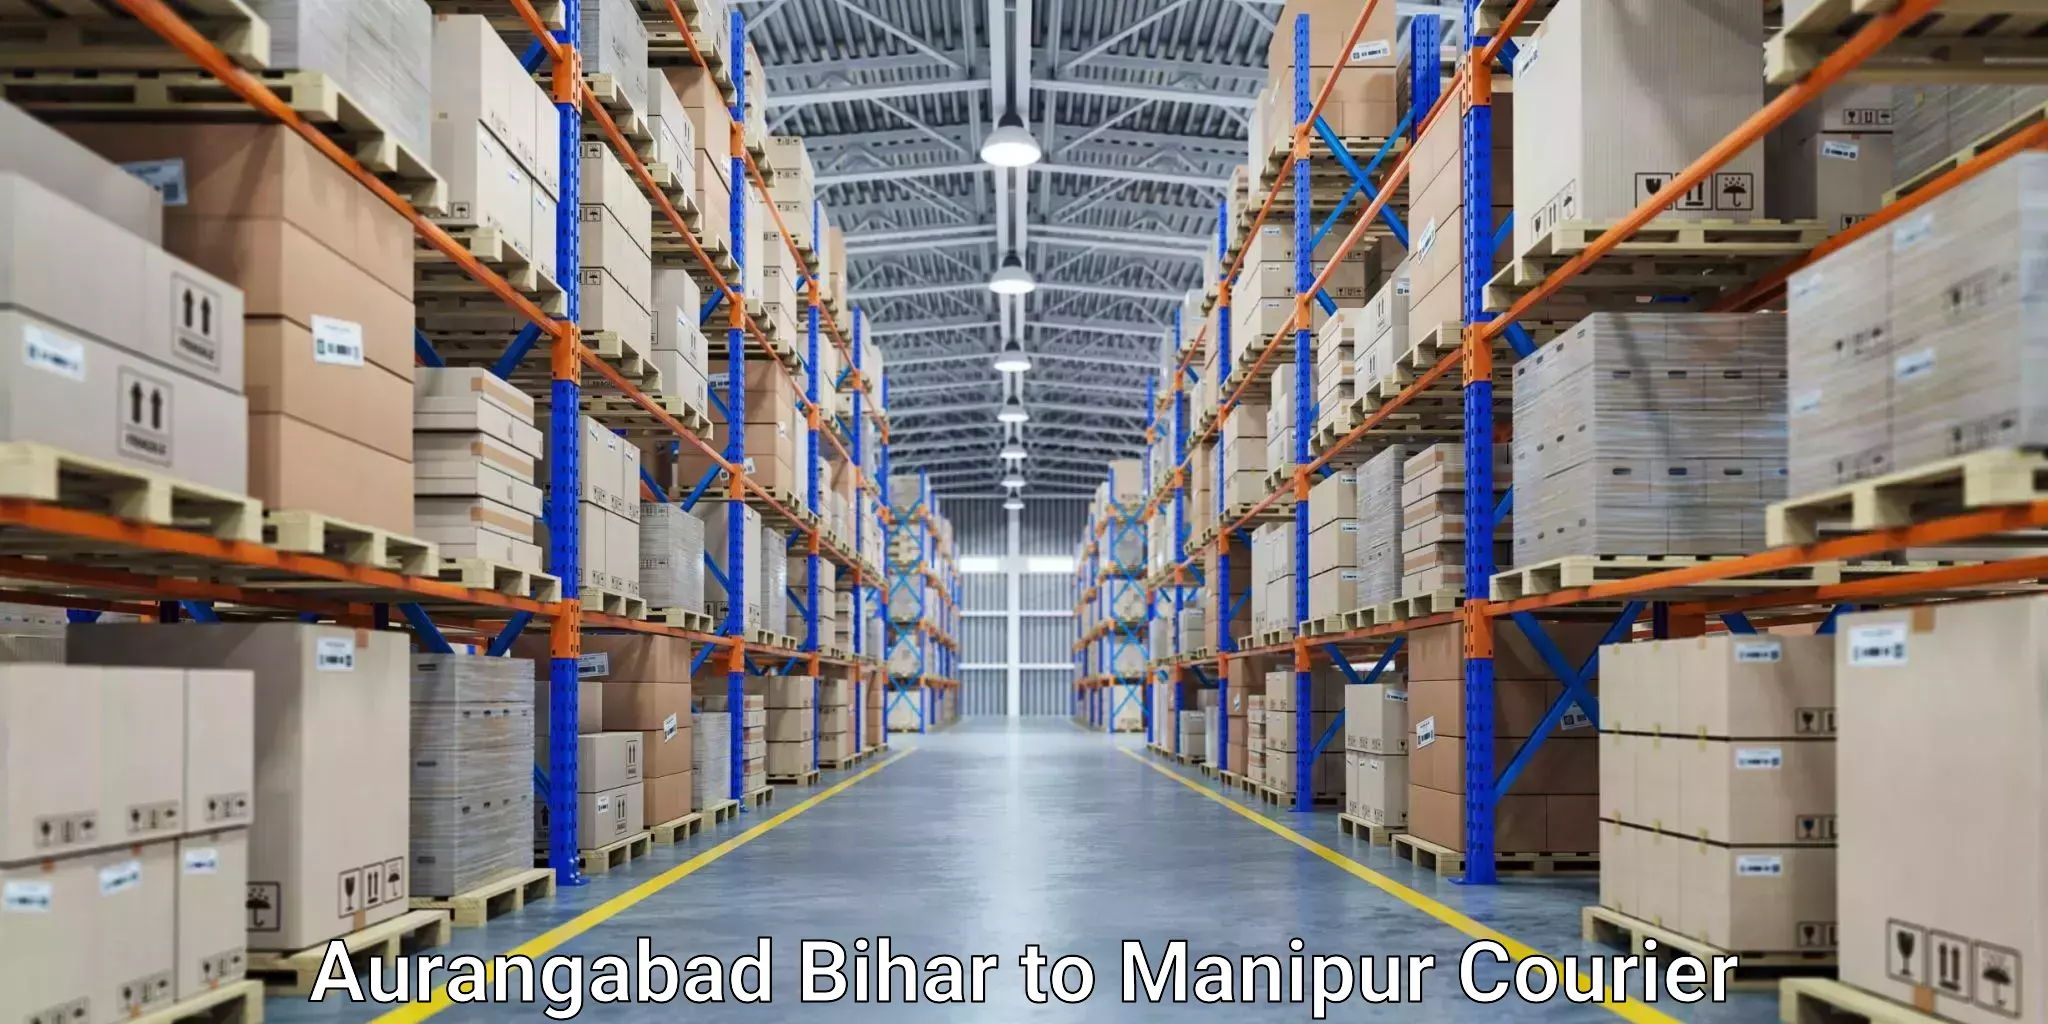 Small business couriers in Aurangabad Bihar to Imphal